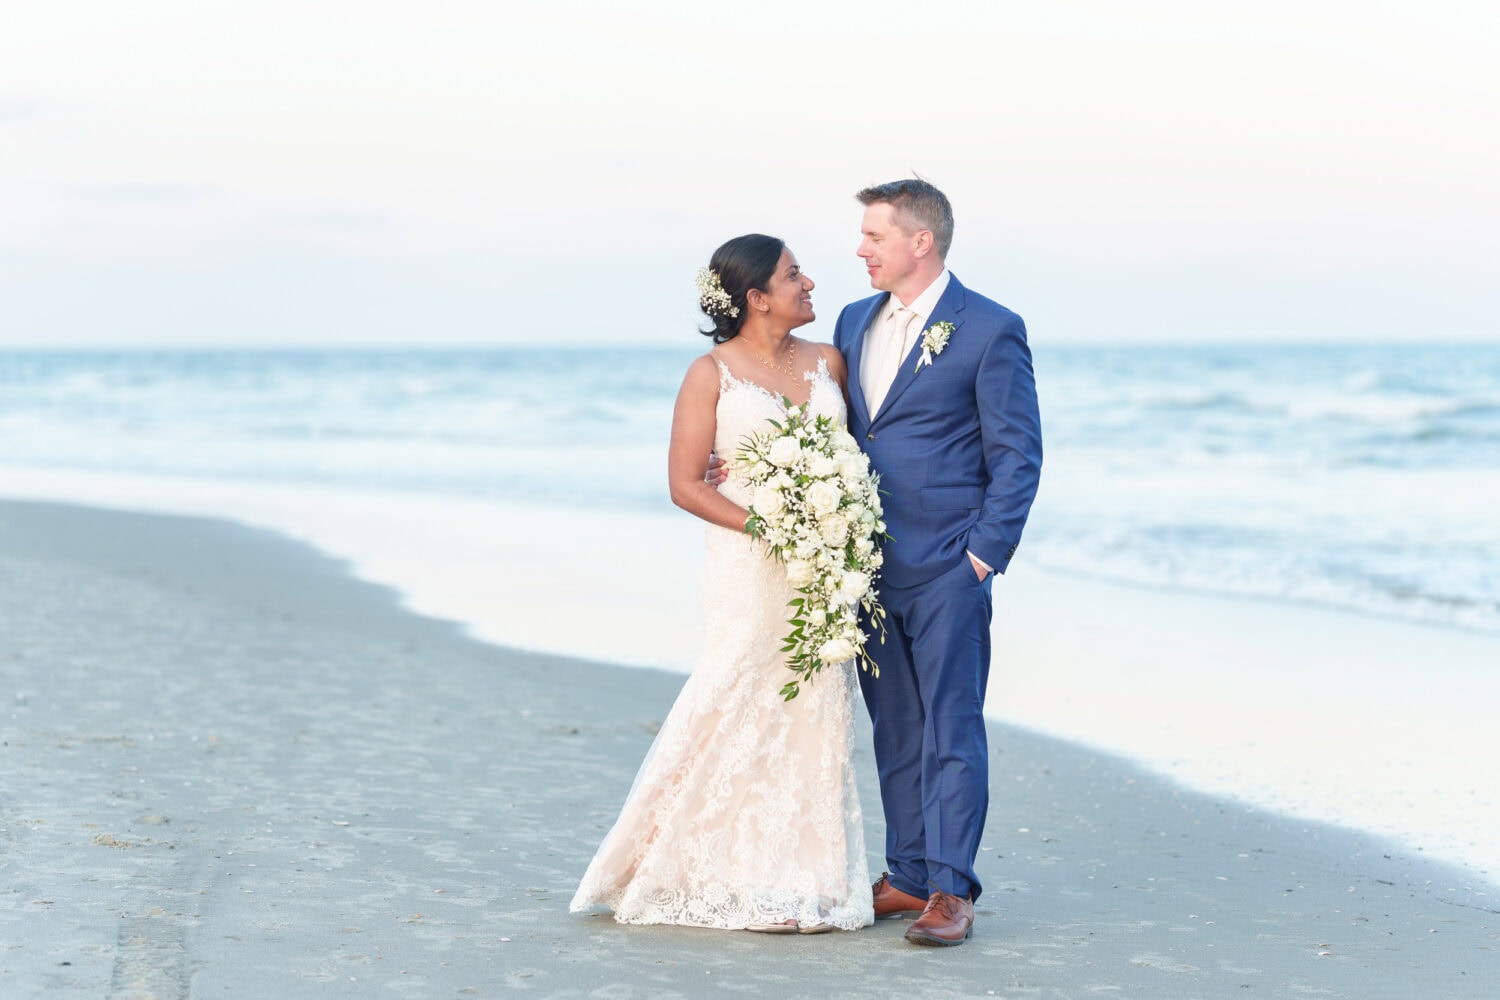 Bride and groom in front of the ocean at sunset - 21 Main Events